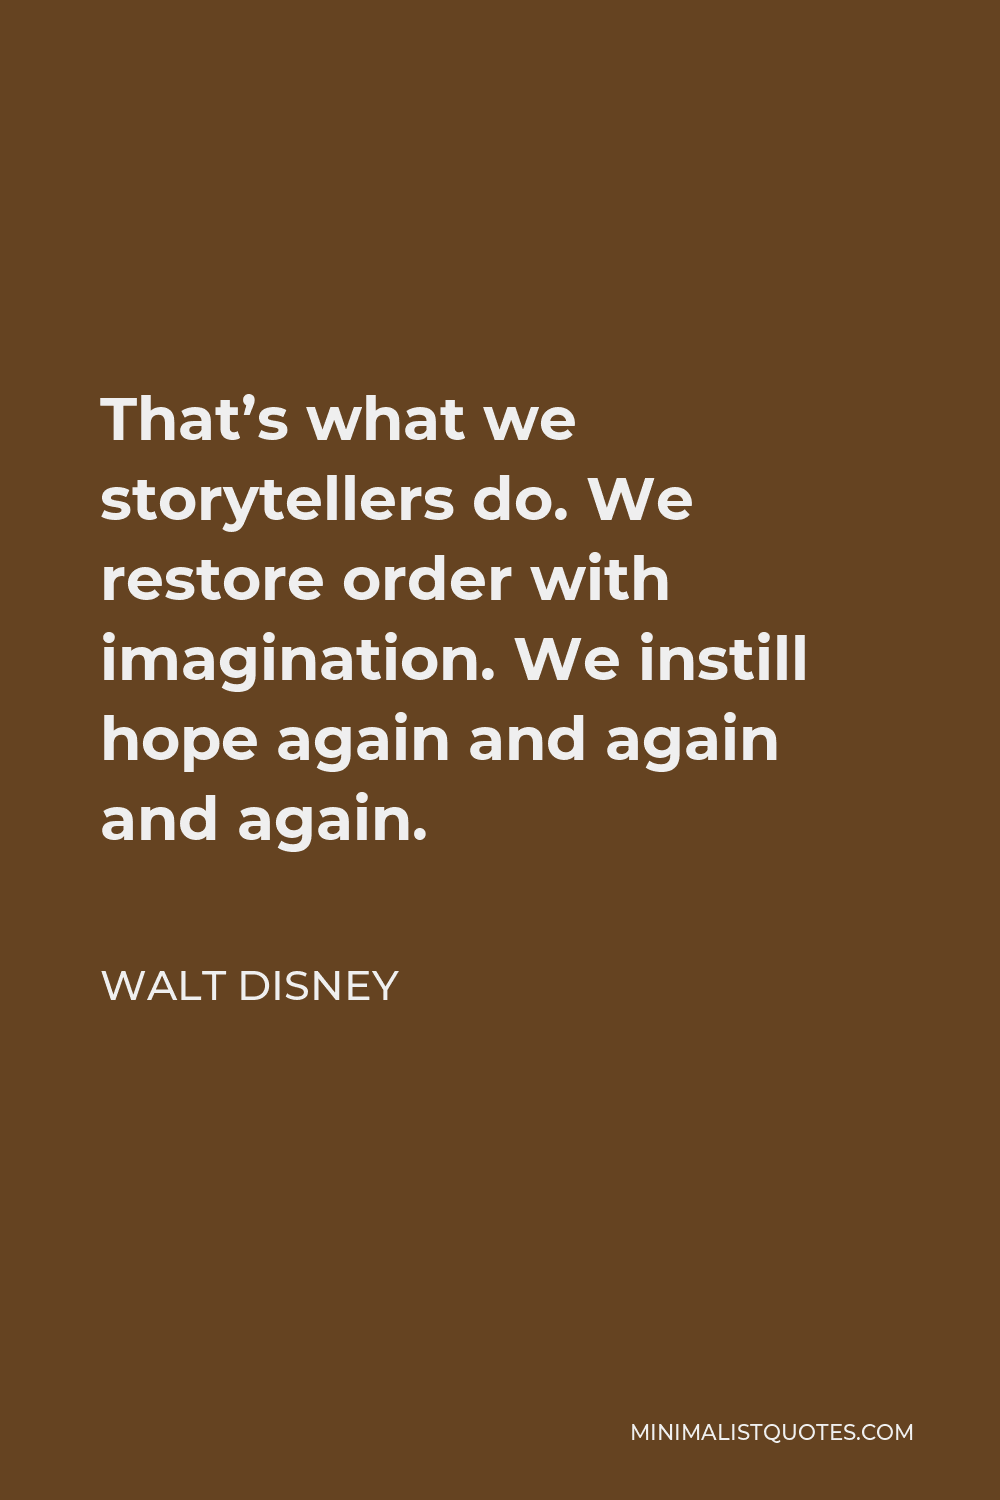 Walt Disney Quote - That’s what we storytellers do. We restore order with imagination. We instill hope again and again and again.